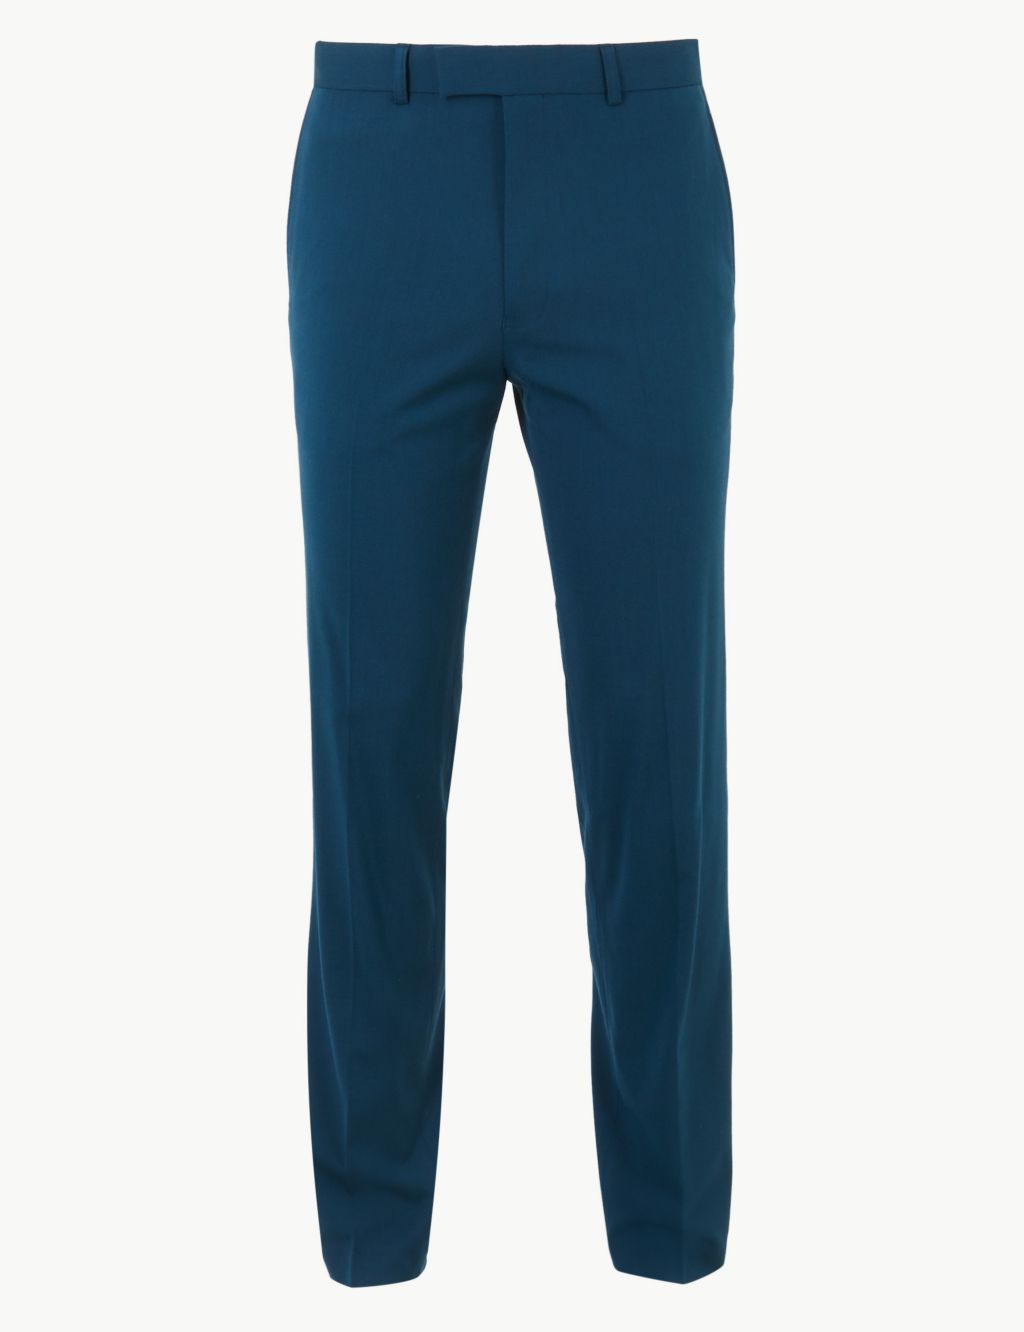 Slim Fit Trousers with Stretch | M&S Collection | M&S